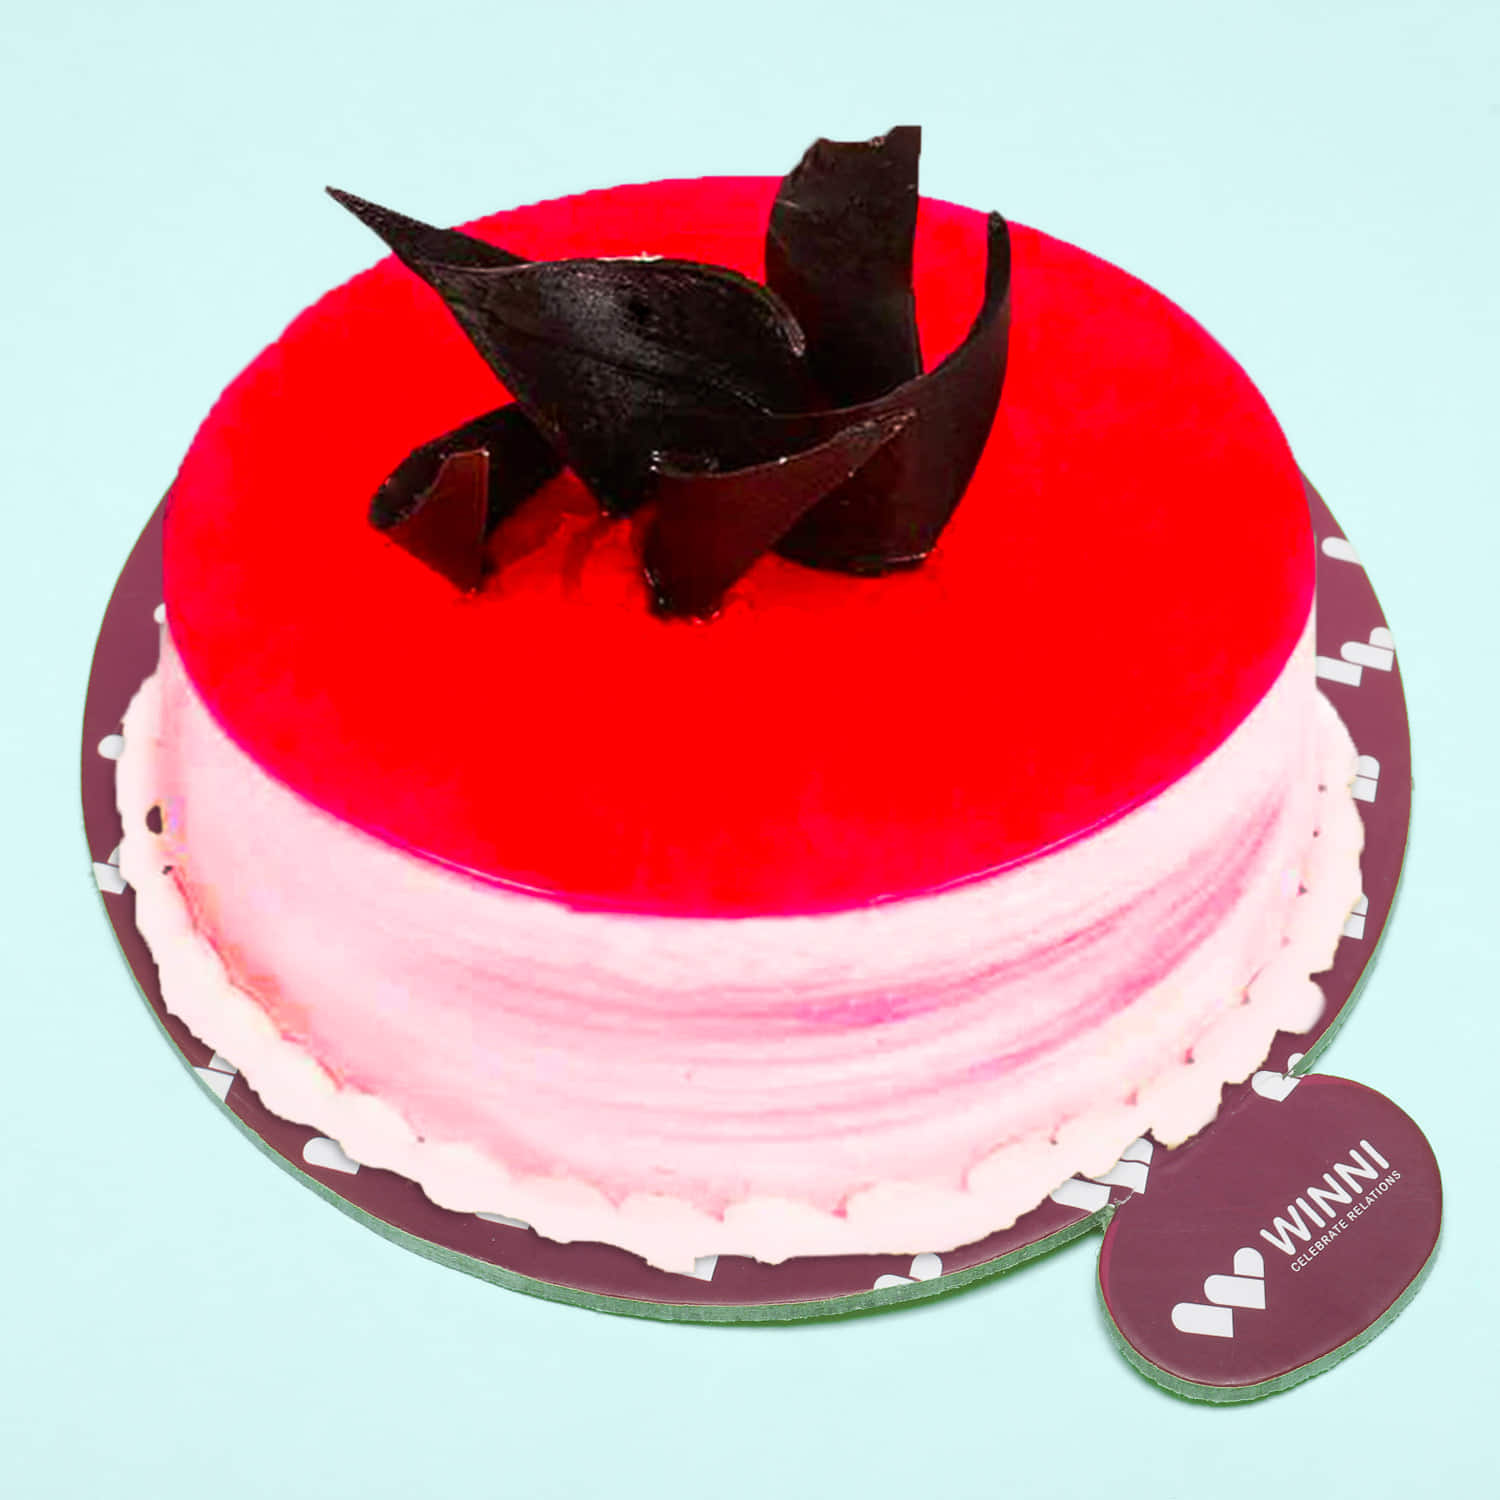 Buy, order or Send online After Eight Cake for Loved ones | Winni | Winni.in